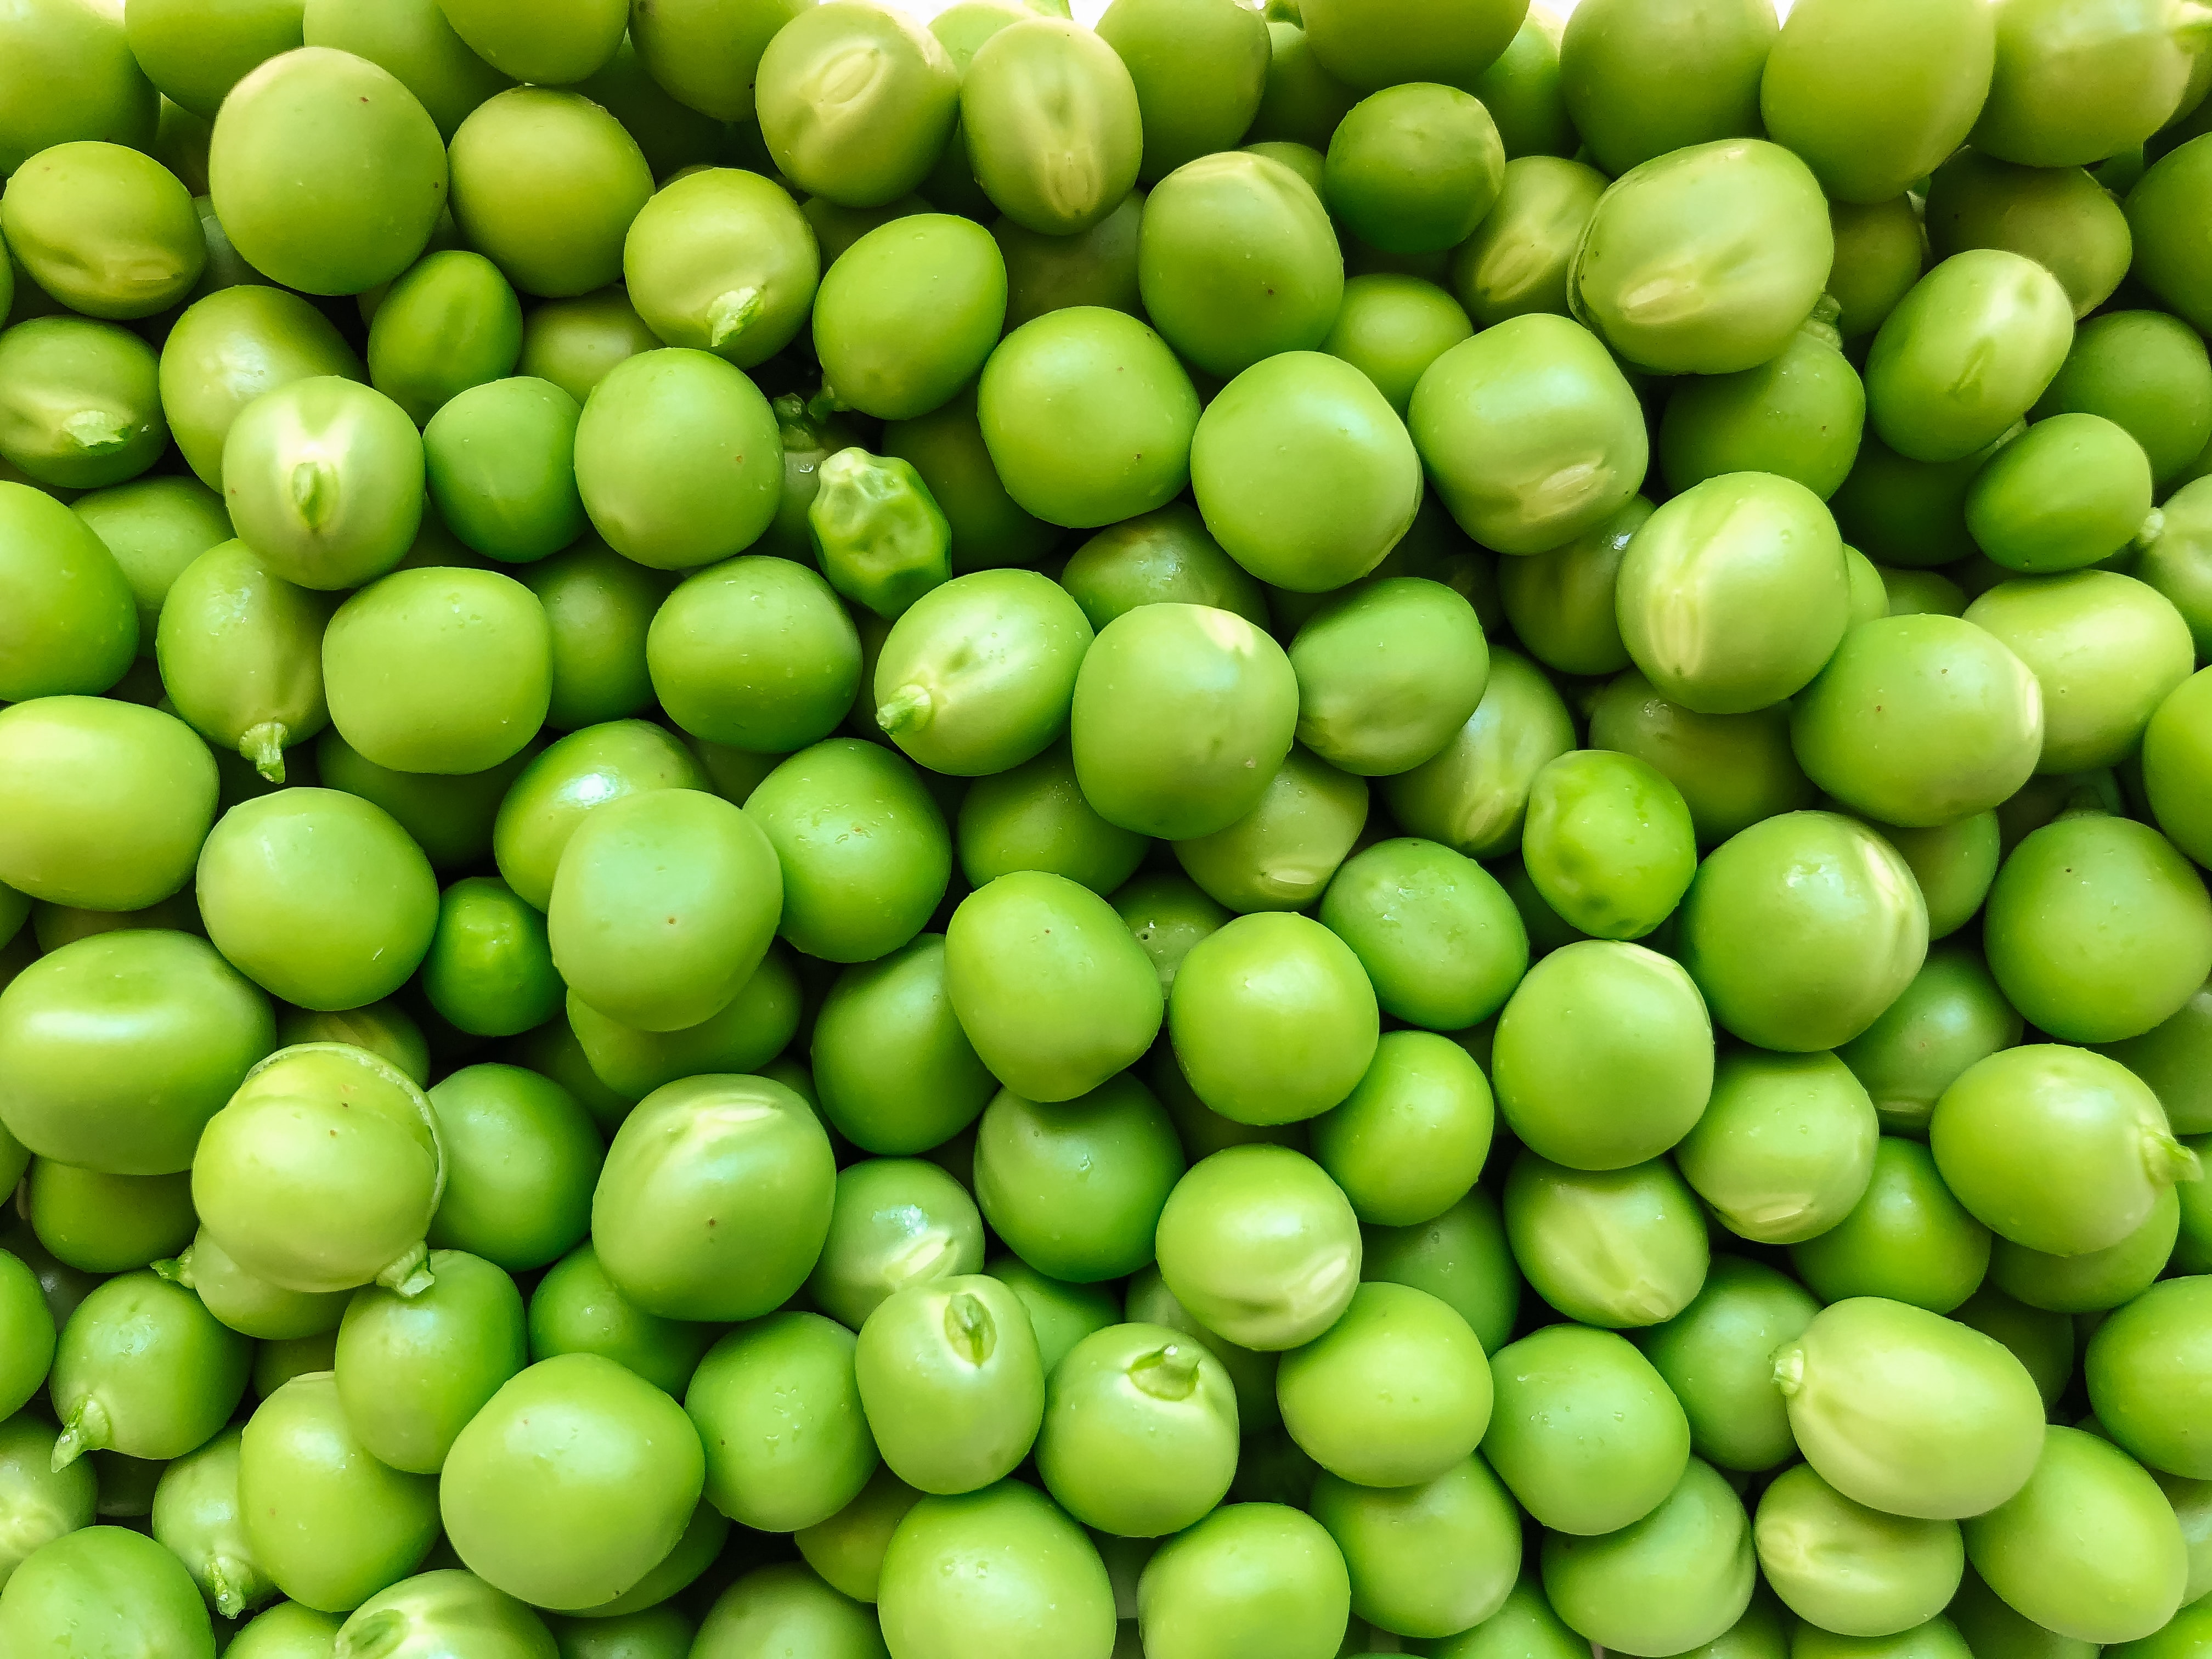 Pea Protein: Natural Power for High-Quality Meat Substitute Products